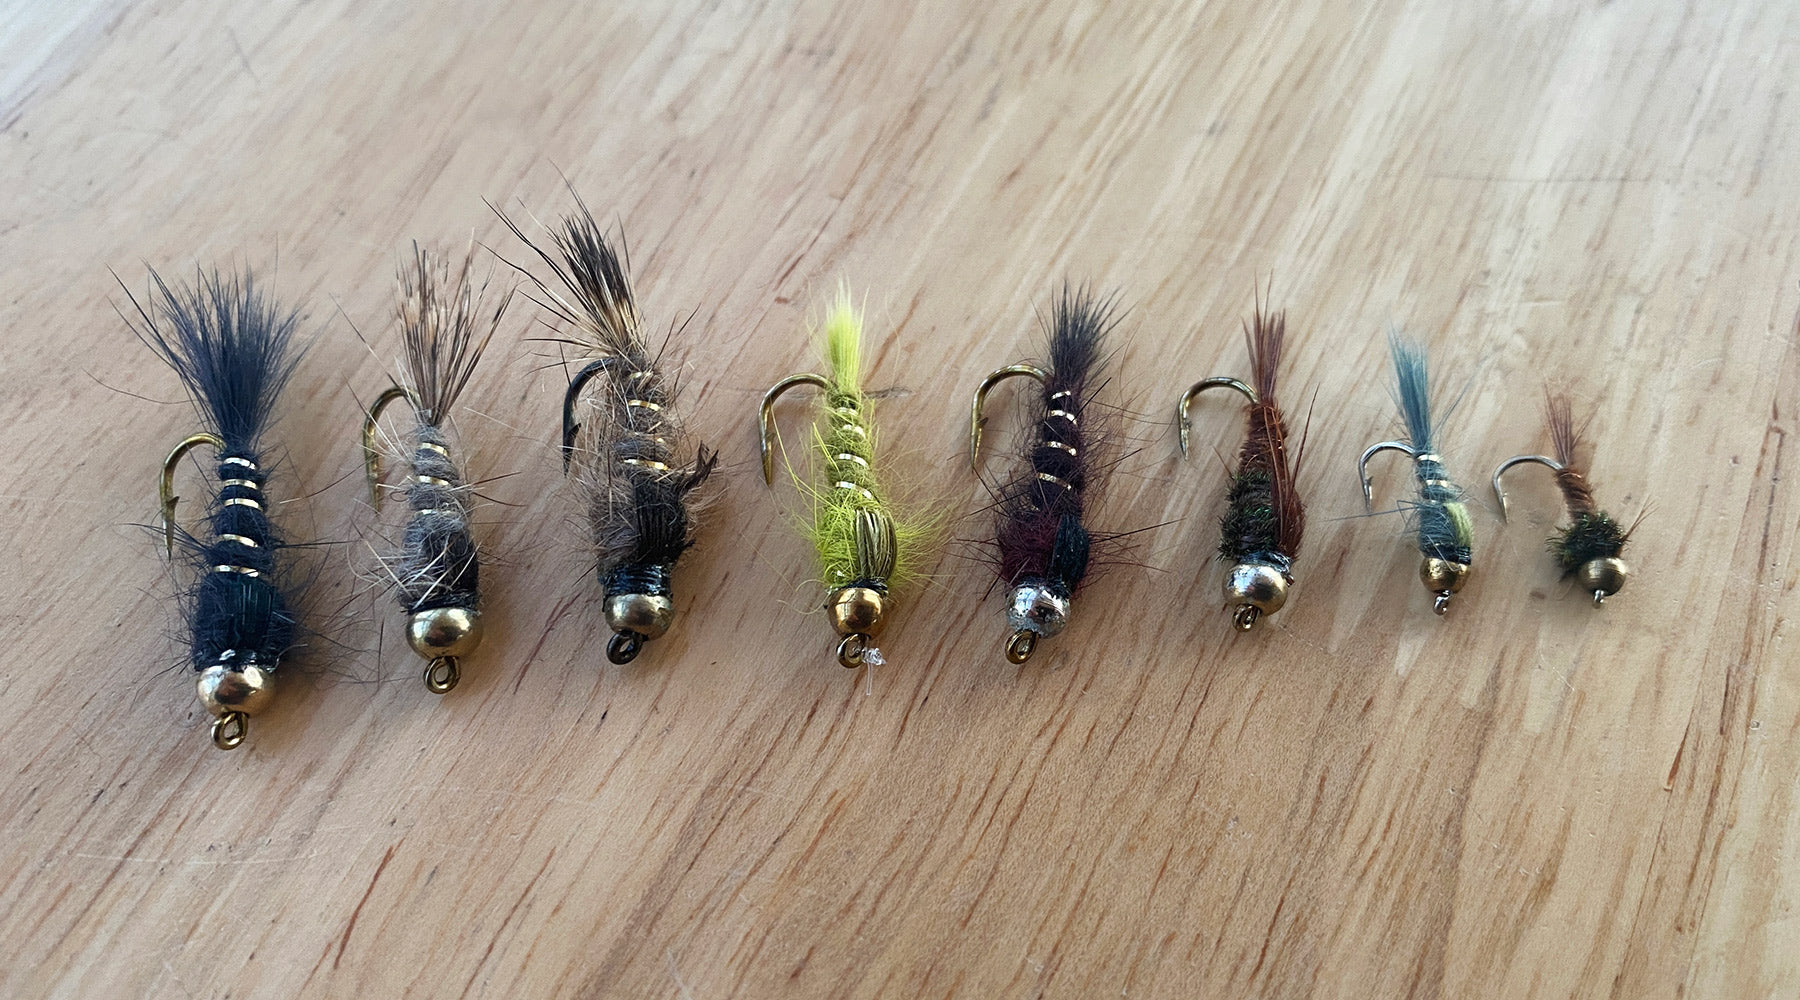 Pheasant Tail fly